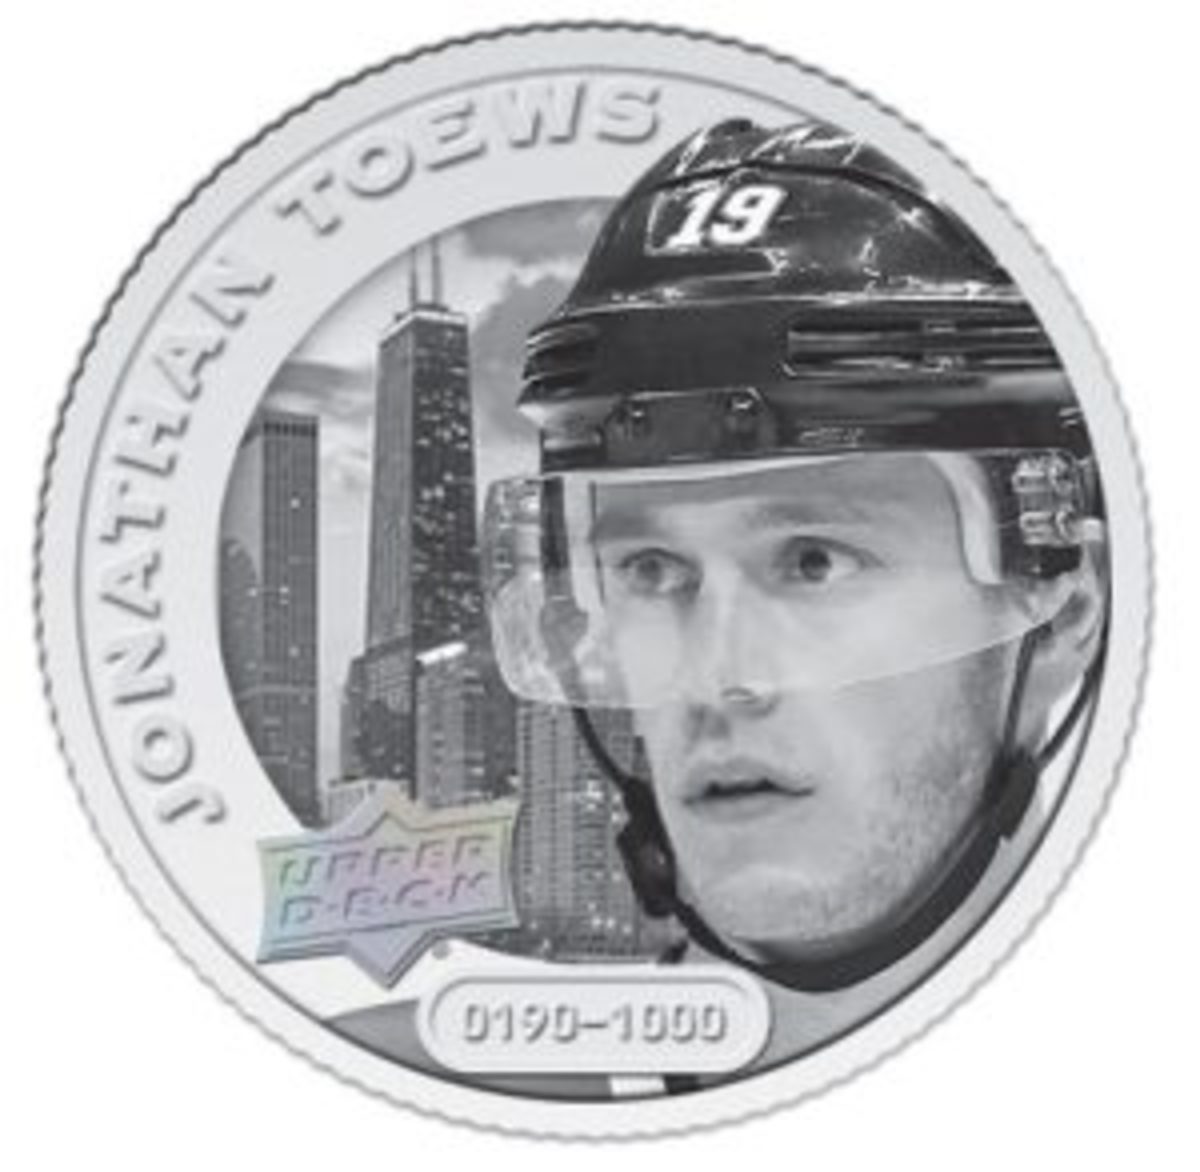 The Grandeur Hockey Coin Collection includes a high-relief silver coin variation that is numbered to 1,000 for each player. 